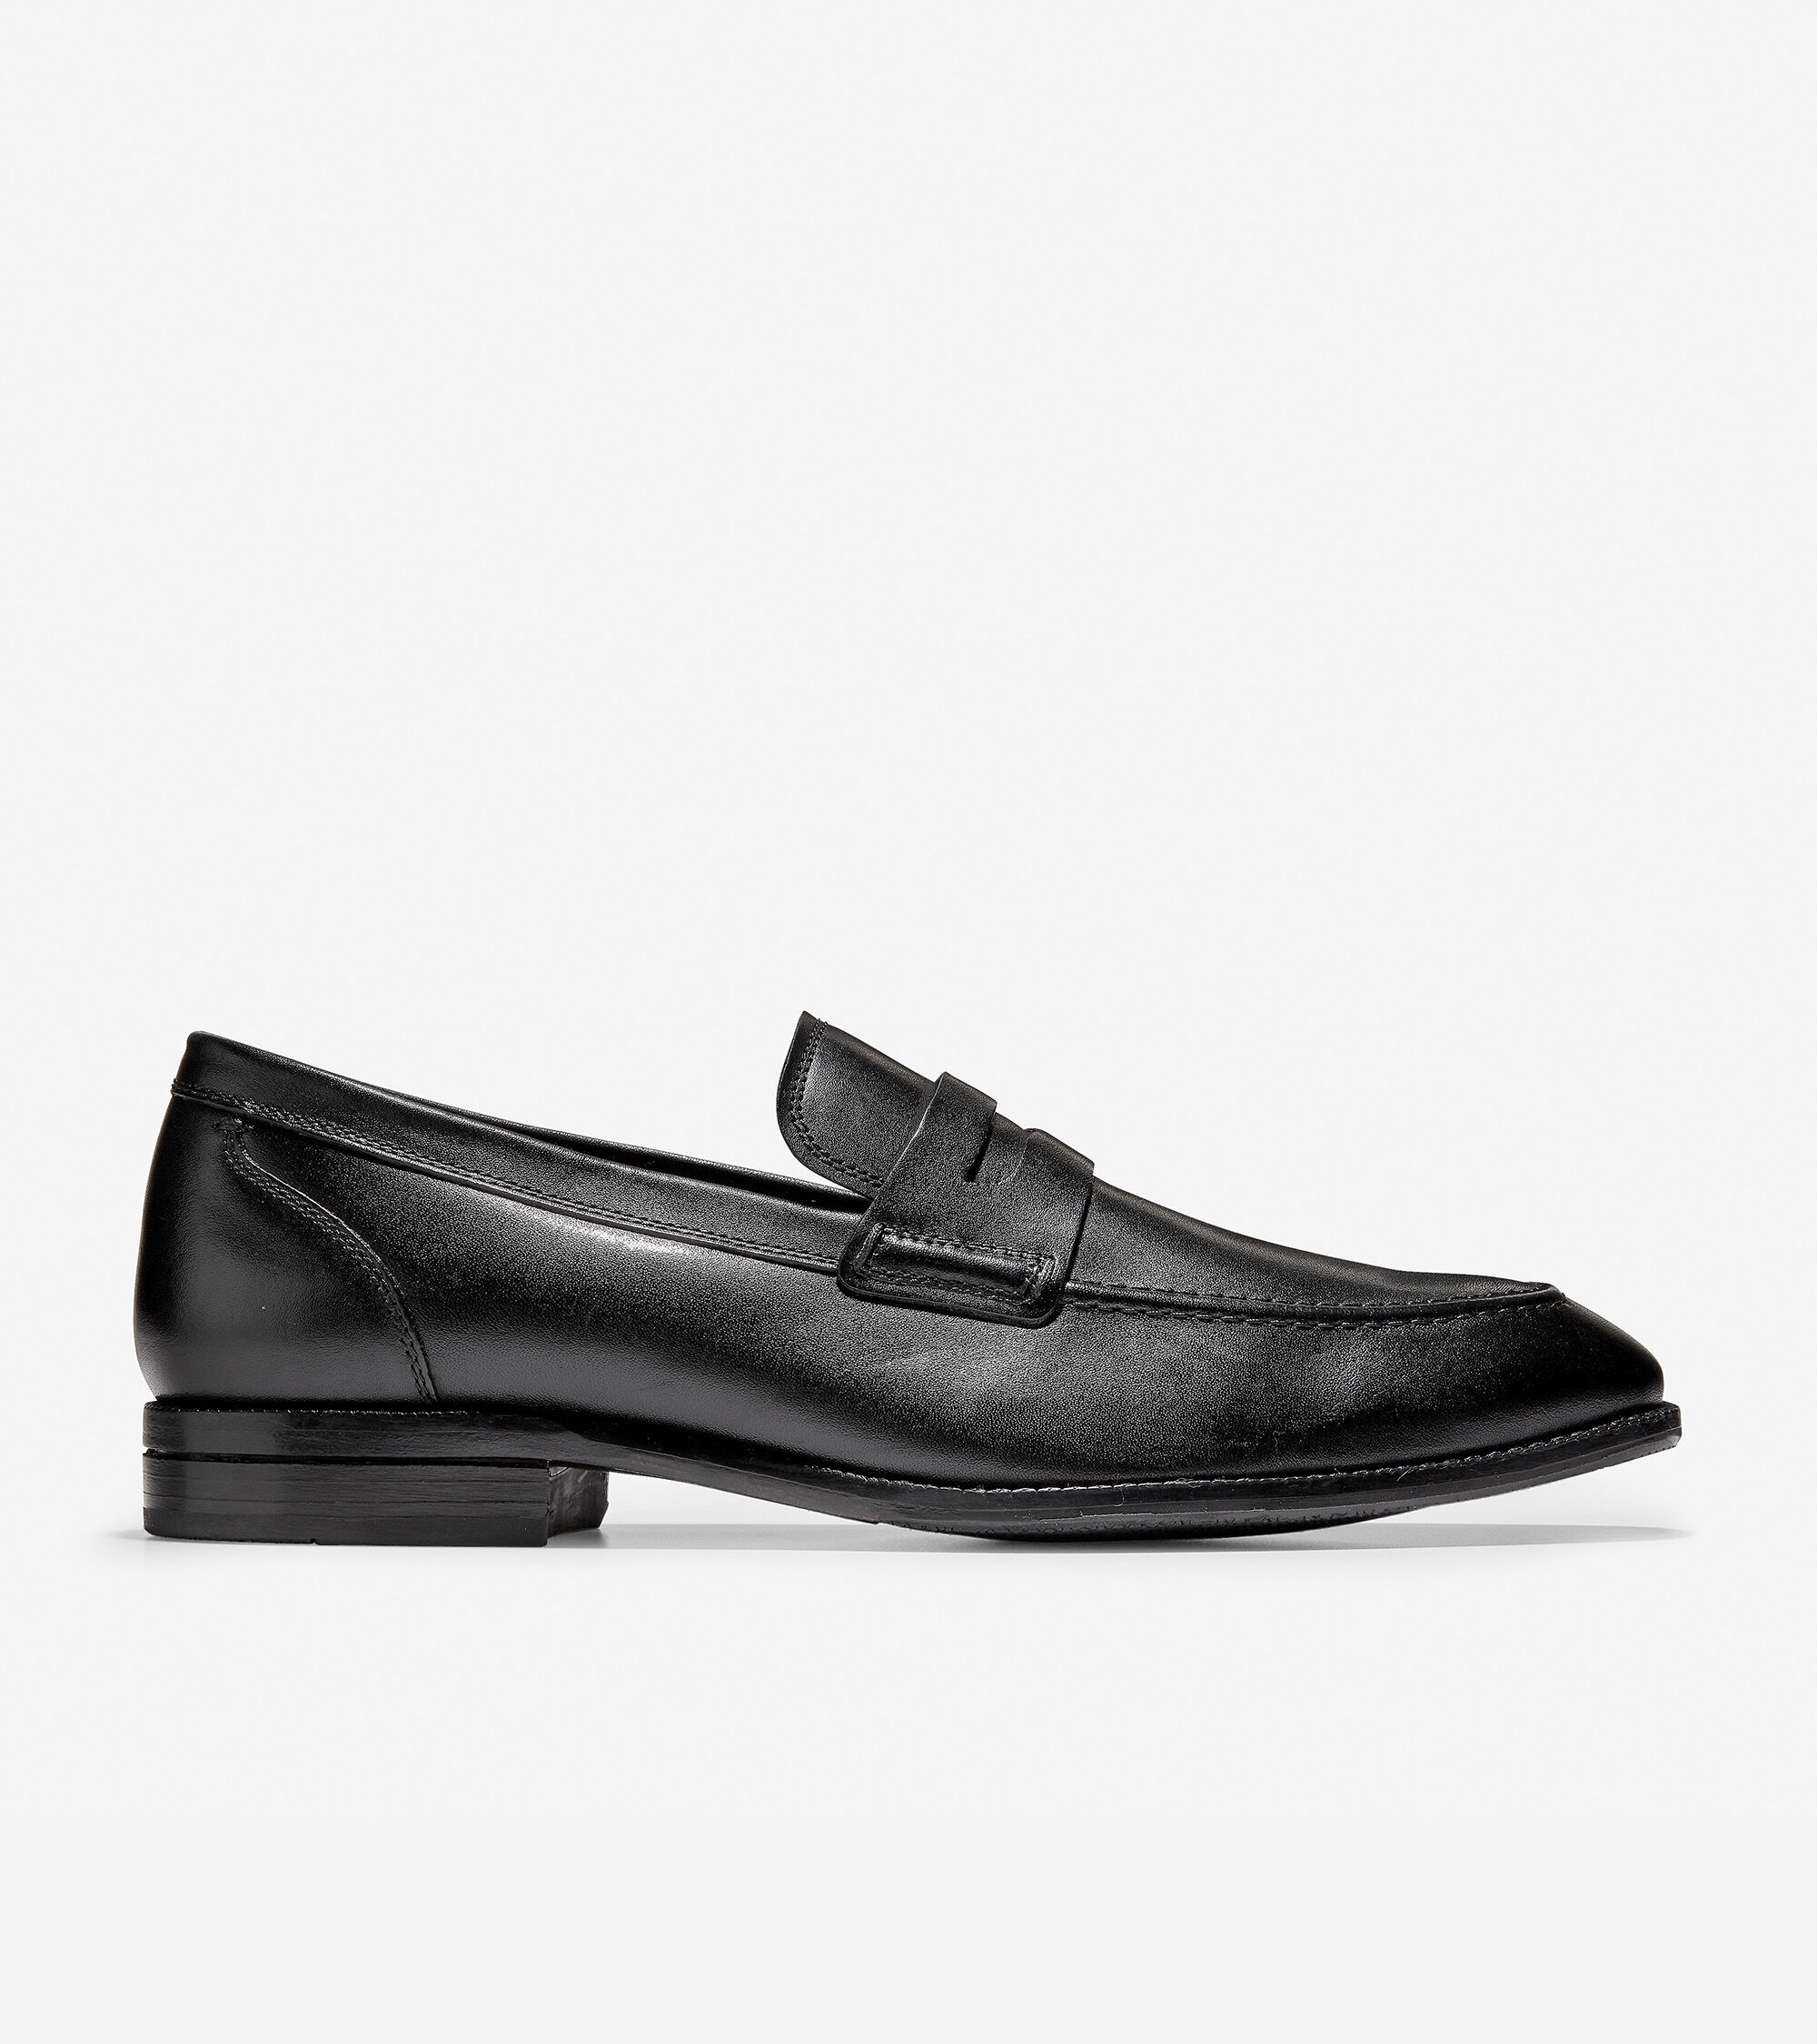 patent leather penny loafers mens